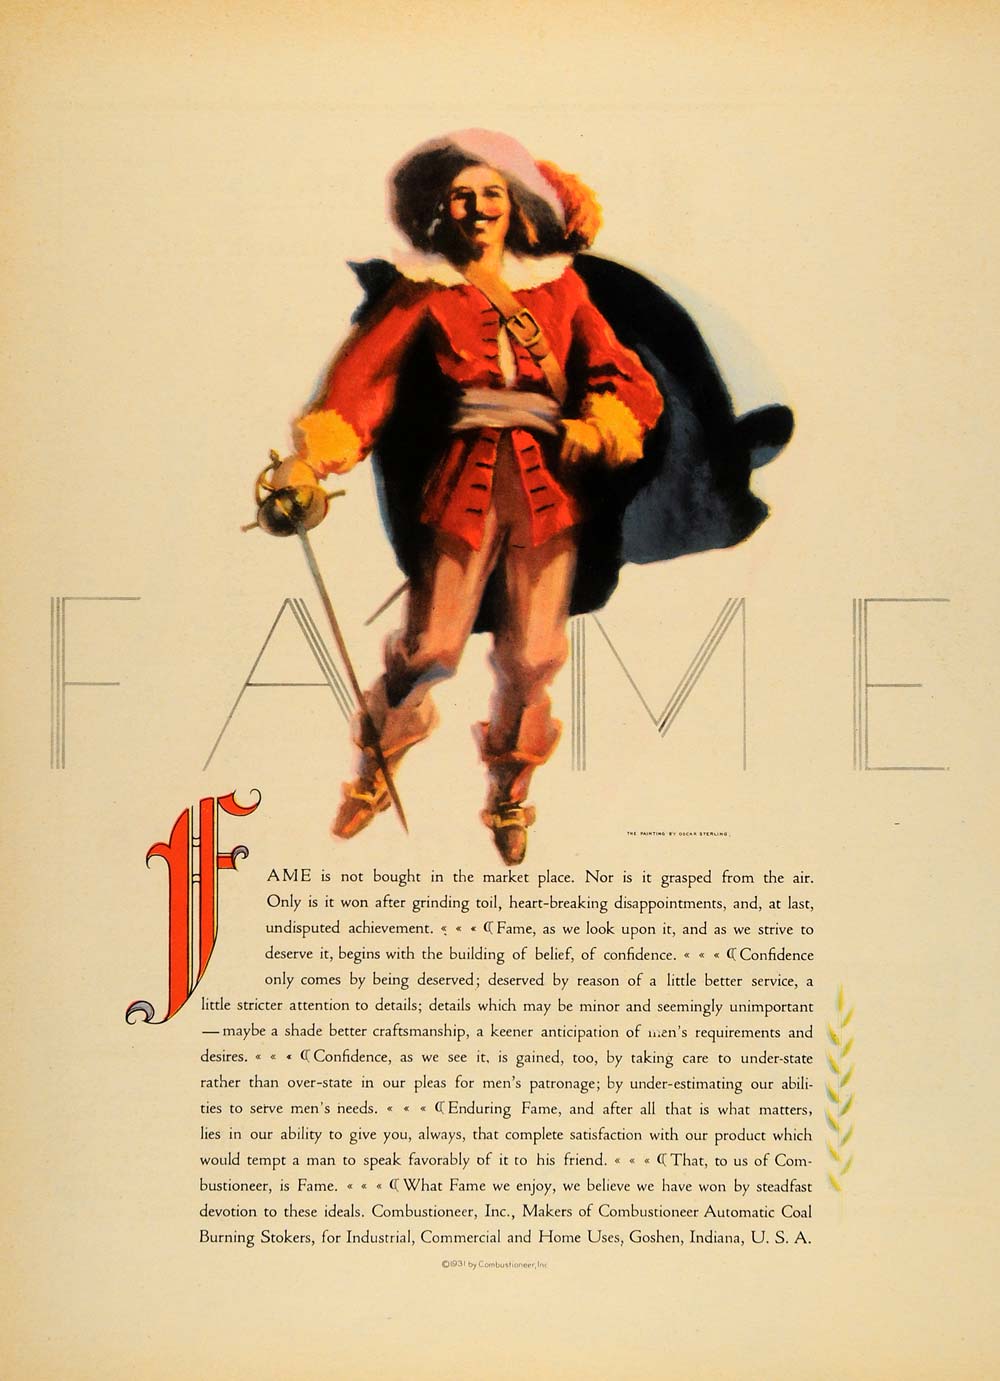 1931 Ad Indiana Combustioneer Automatic Coal Burning Stokers Musketeer Fame F1A